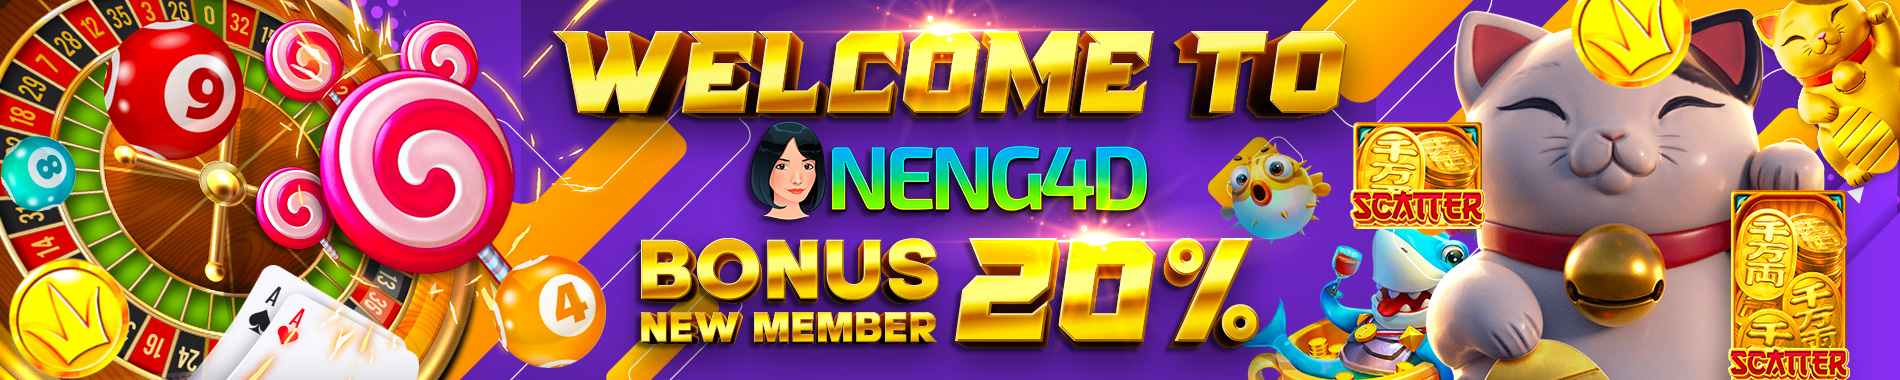 Welcome to NENG4D